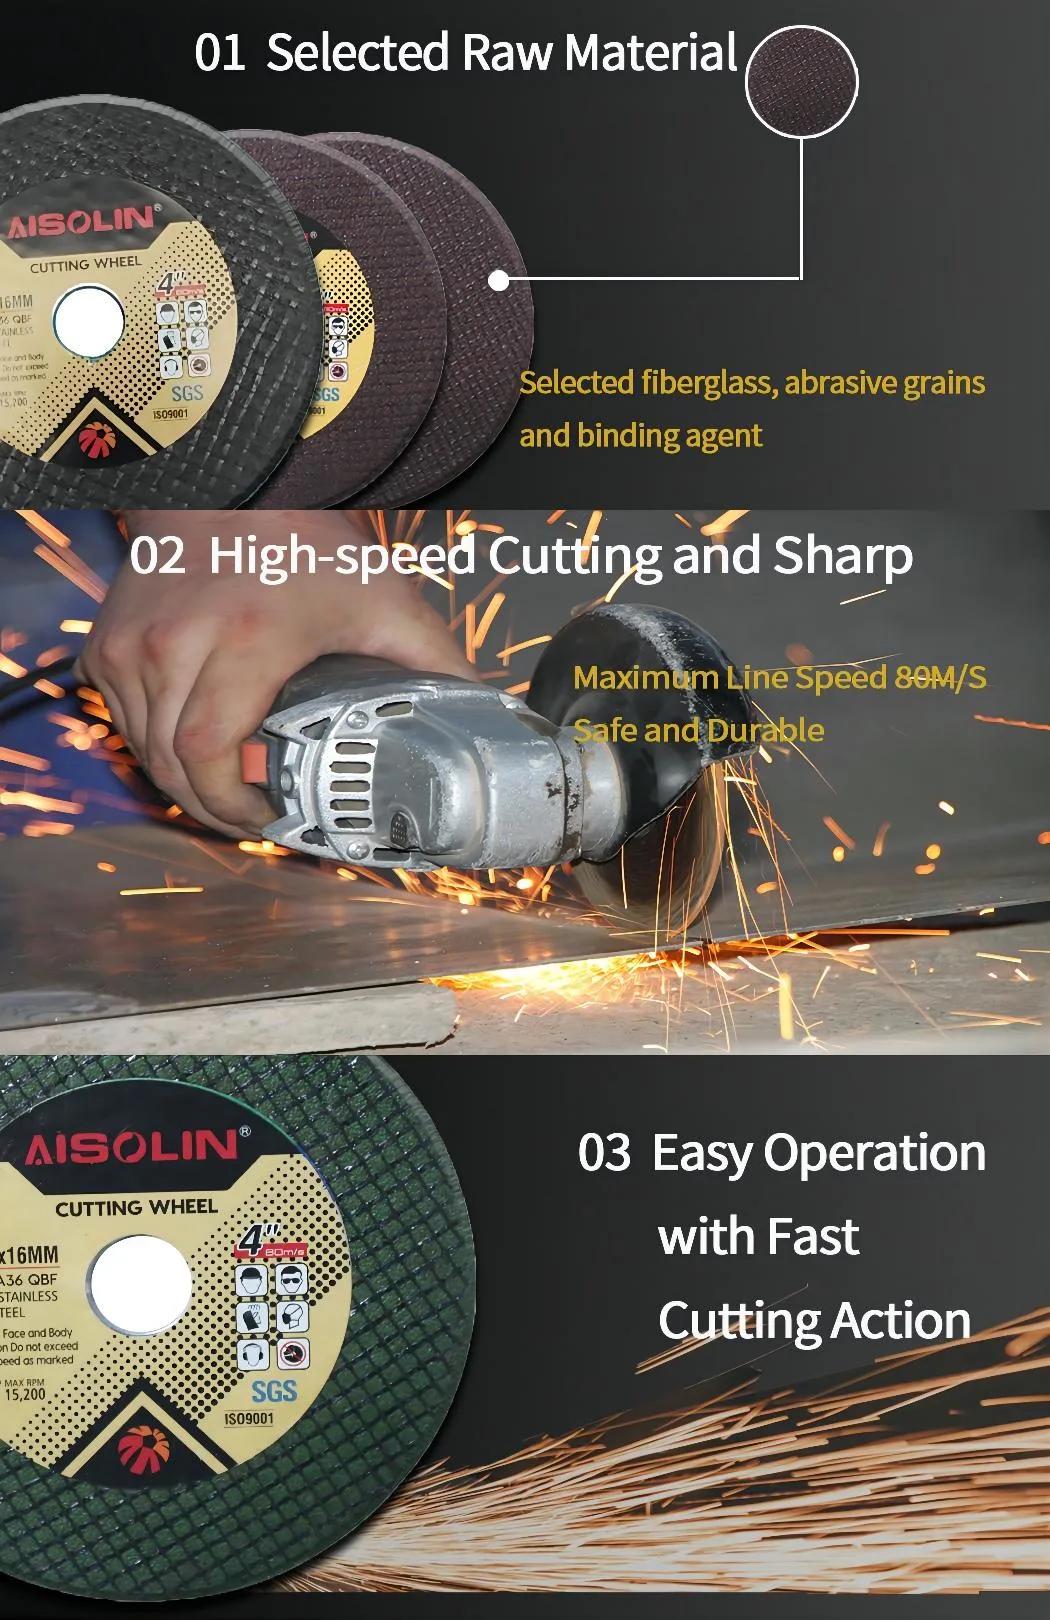 Mufacturer T41 5 Inch Angle Grinder Resin Abrasive Cut off Cutting Wheel for Metal Steel with MPa En12413